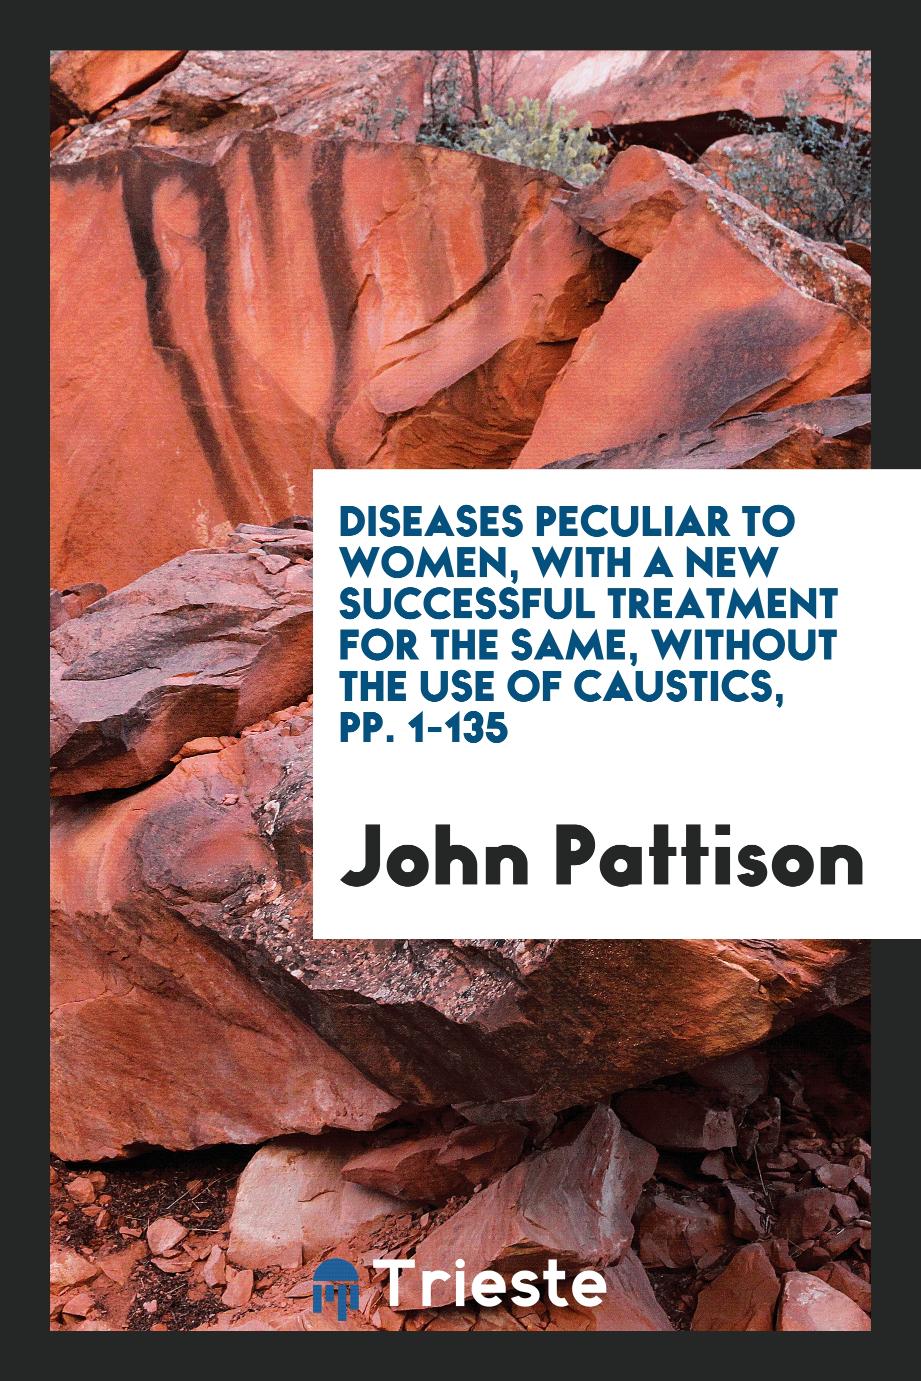 Diseases Peculiar to Women, with a New Successful Treatment for the Same, without the Use of Caustics, pp. 1-135